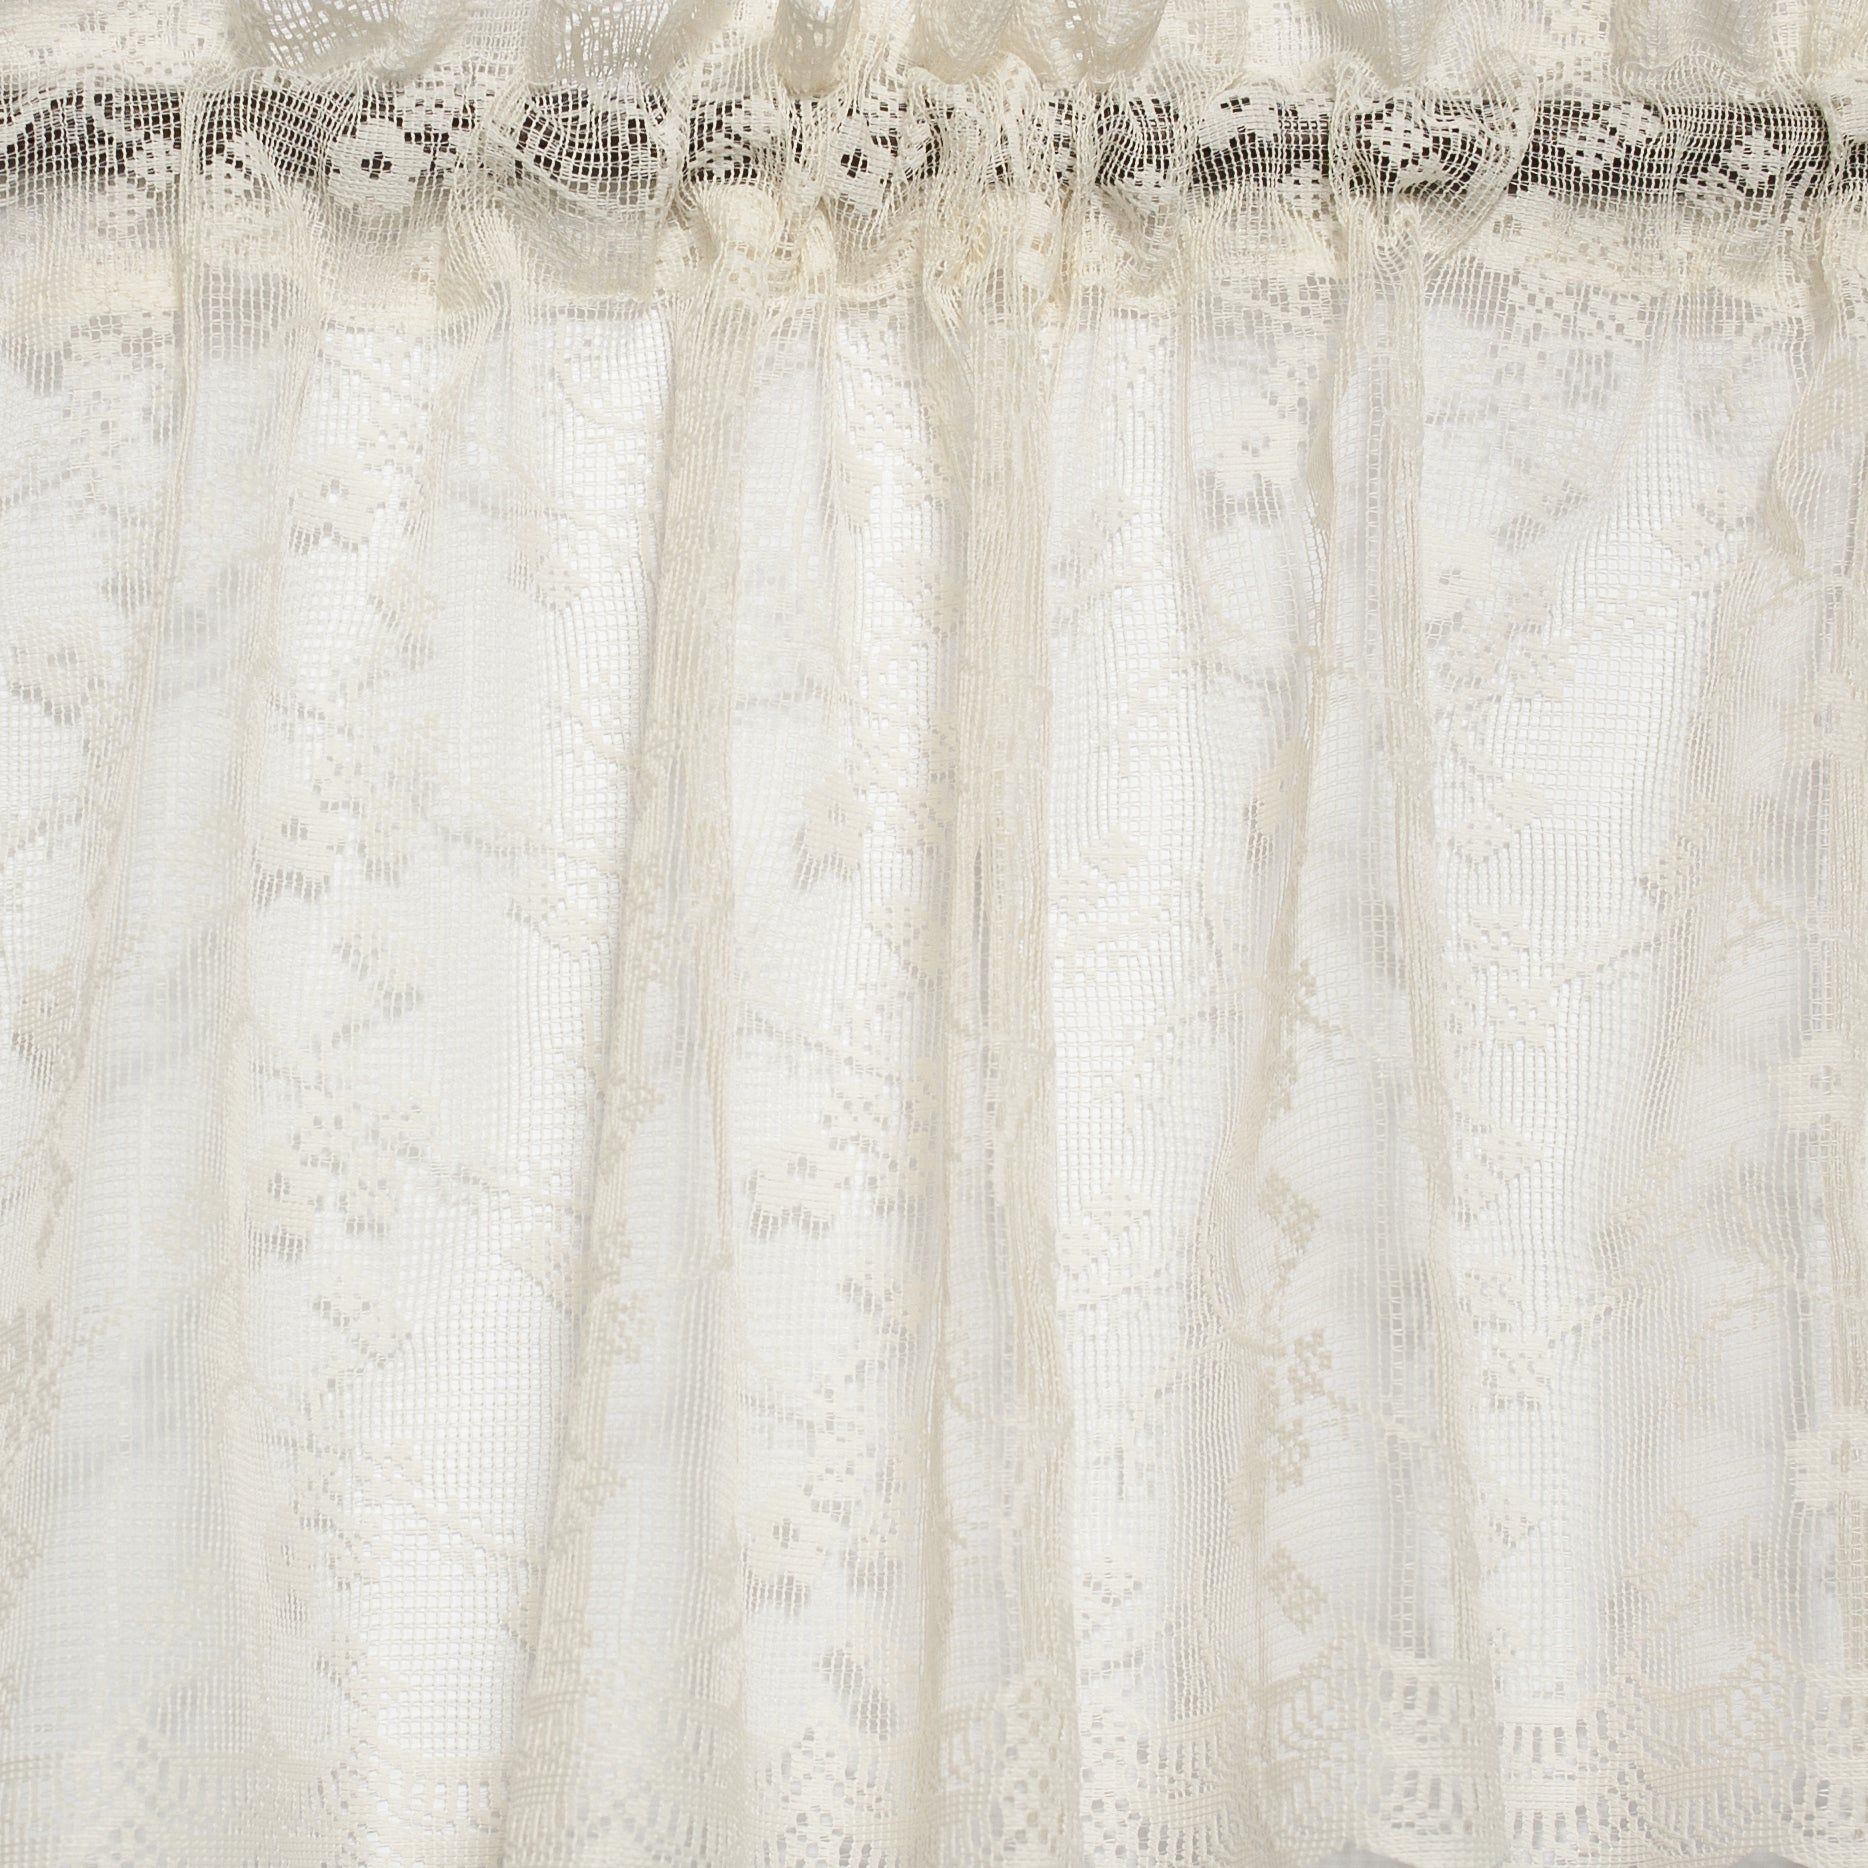 Elegant Ivory Priscilla Lace Kitchen Curtain Pieces  Tier, Swag And Valance  Options In Elegant White Priscilla Lace Kitchen Curtain Pieces (View 3 of 20)